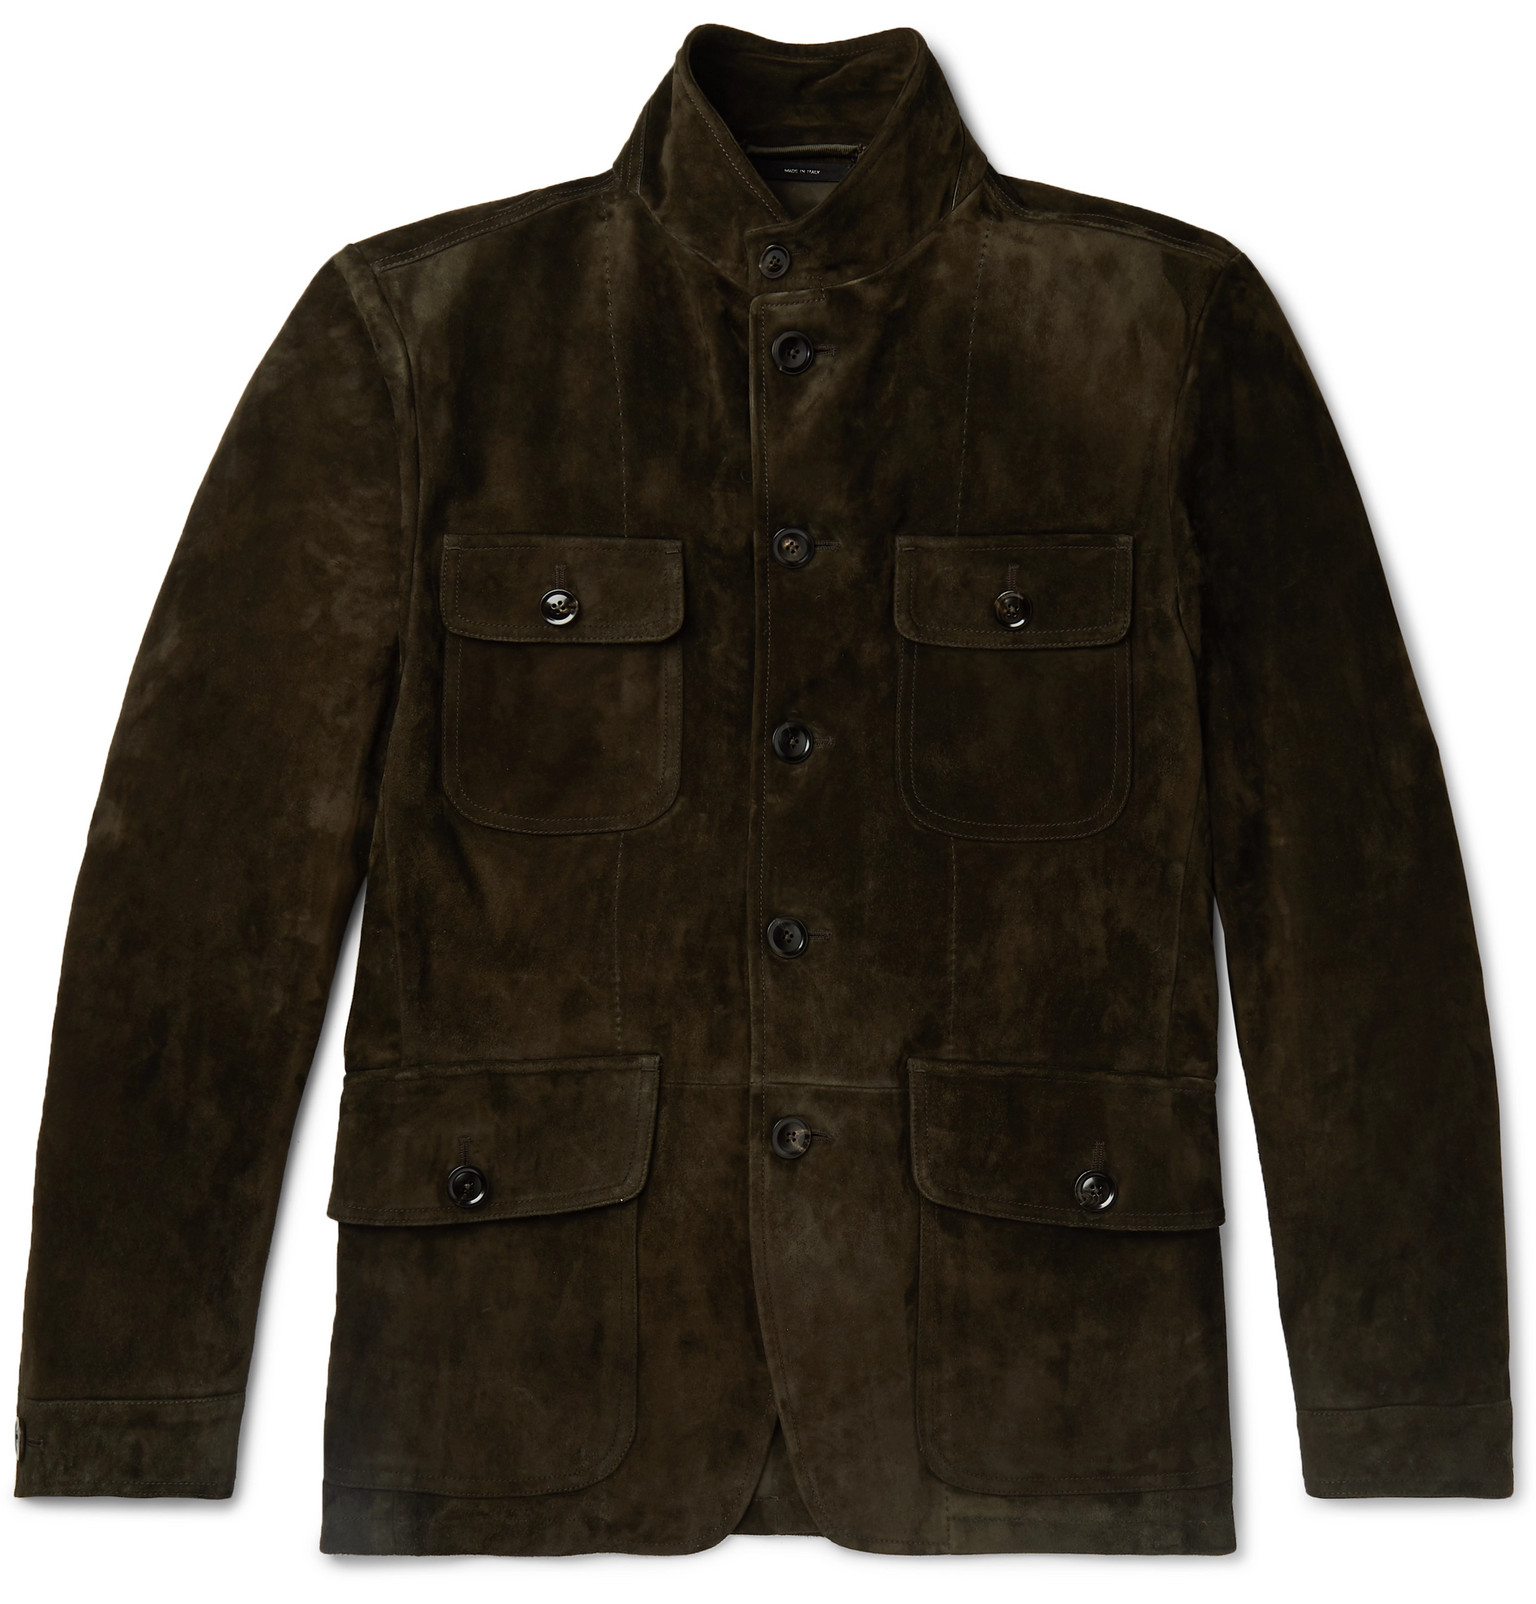 TOM FORD - Suede Field Jacket - Men - Brown | The Fashionisto